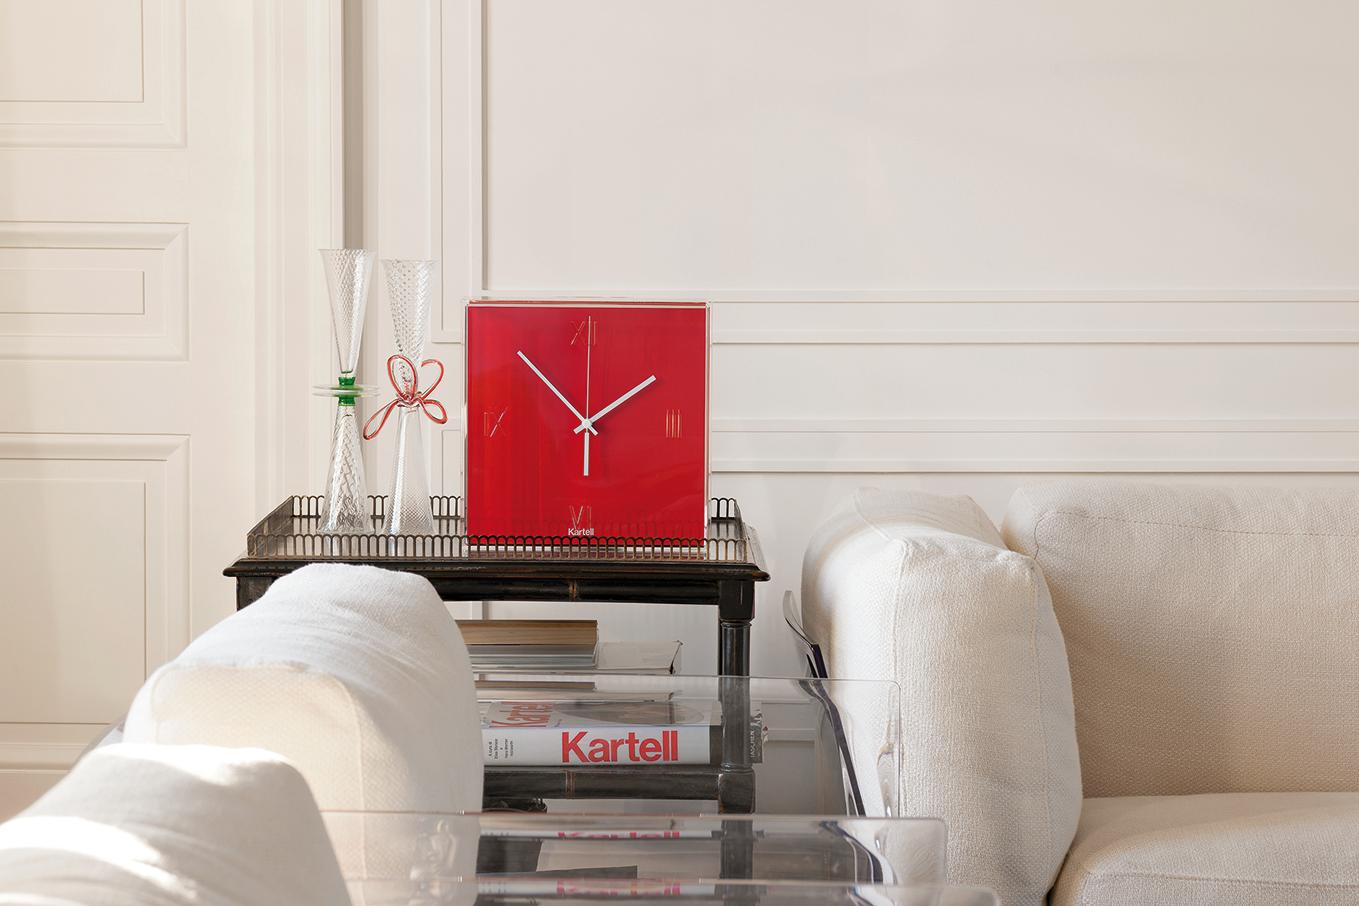 Italian Kartell Tic & Tac Clock in Black by Philippe Starck & Eugeni Quitllet For Sale